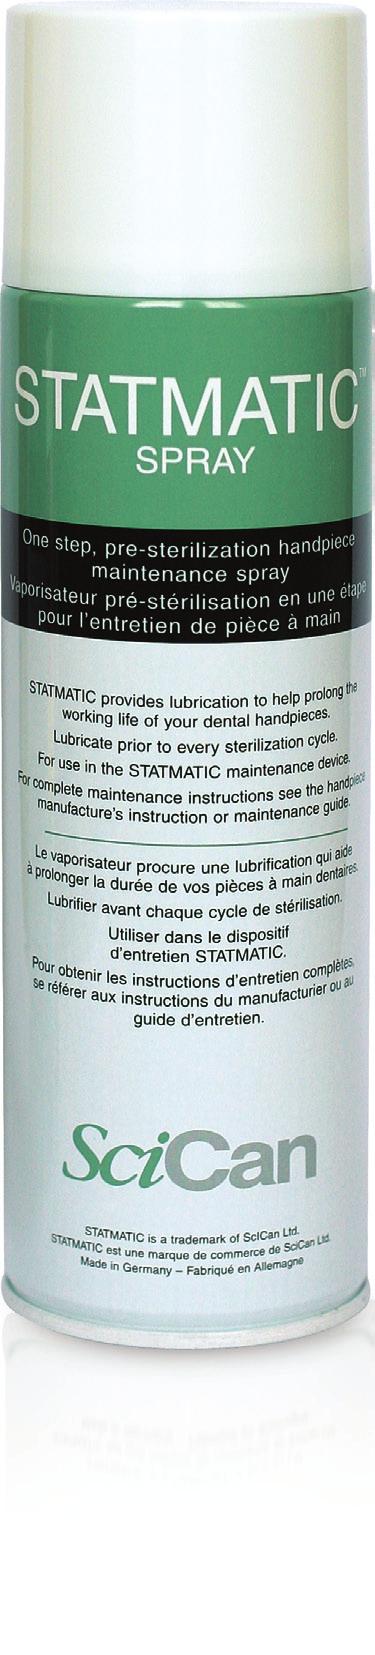 STATMATIC Spray For use with the Statmatic Maintenance System. Cleans and lubricates your handpiece to ensure long lasting service.